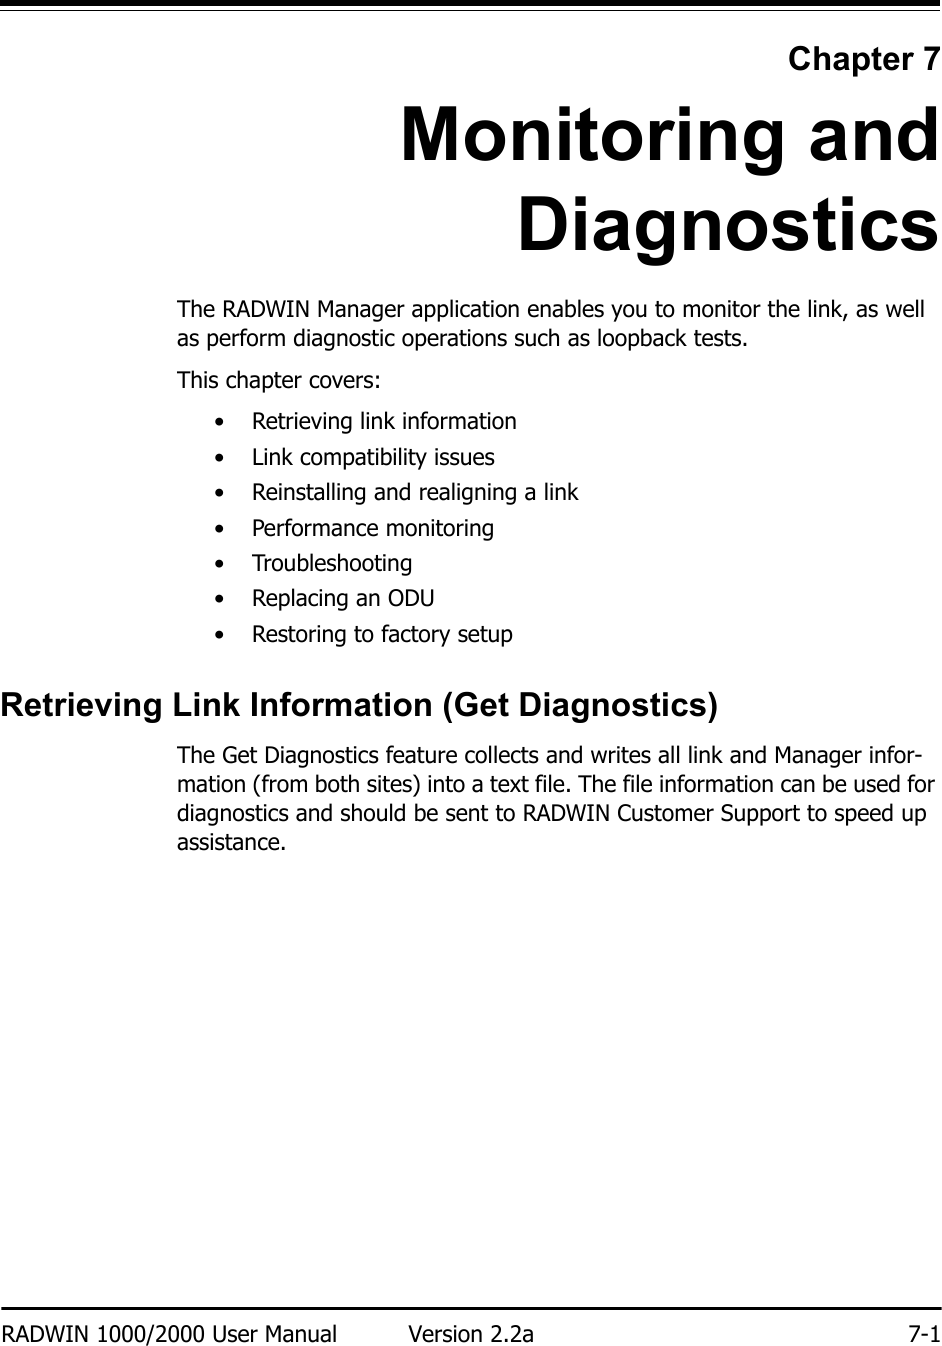 RADWIN 1000/2000 User Manual Version 2.2a 7-1Chapter 7Monitoring andDiagnosticsThe RADWIN Manager application enables you to monitor the link, as well as perform diagnostic operations such as loopback tests. This chapter covers:• Retrieving link information• Link compatibility issues• Reinstalling and realigning a link• Performance monitoring• Troubleshooting•Replacing an ODU• Restoring to factory setupRetrieving Link Information (Get Diagnostics)The Get Diagnostics feature collects and writes all link and Manager infor-mation (from both sites) into a text file. The file information can be used for diagnostics and should be sent to RADWIN Customer Support to speed up assistance.